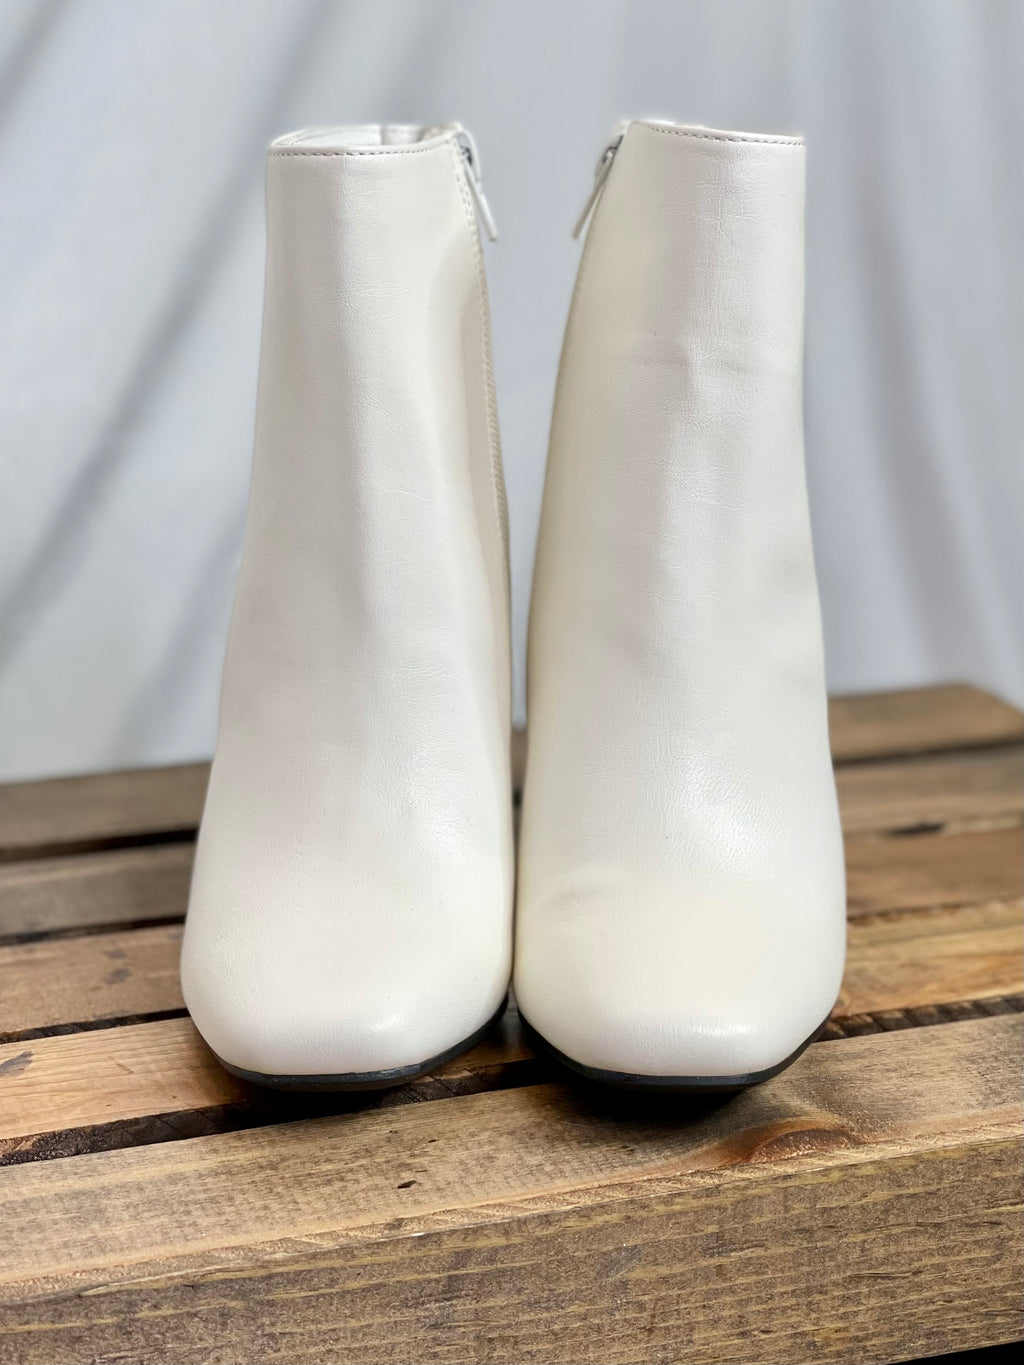 These booties feature a white color, square toe, 3-inch heel, zipper closure and run true to size! 